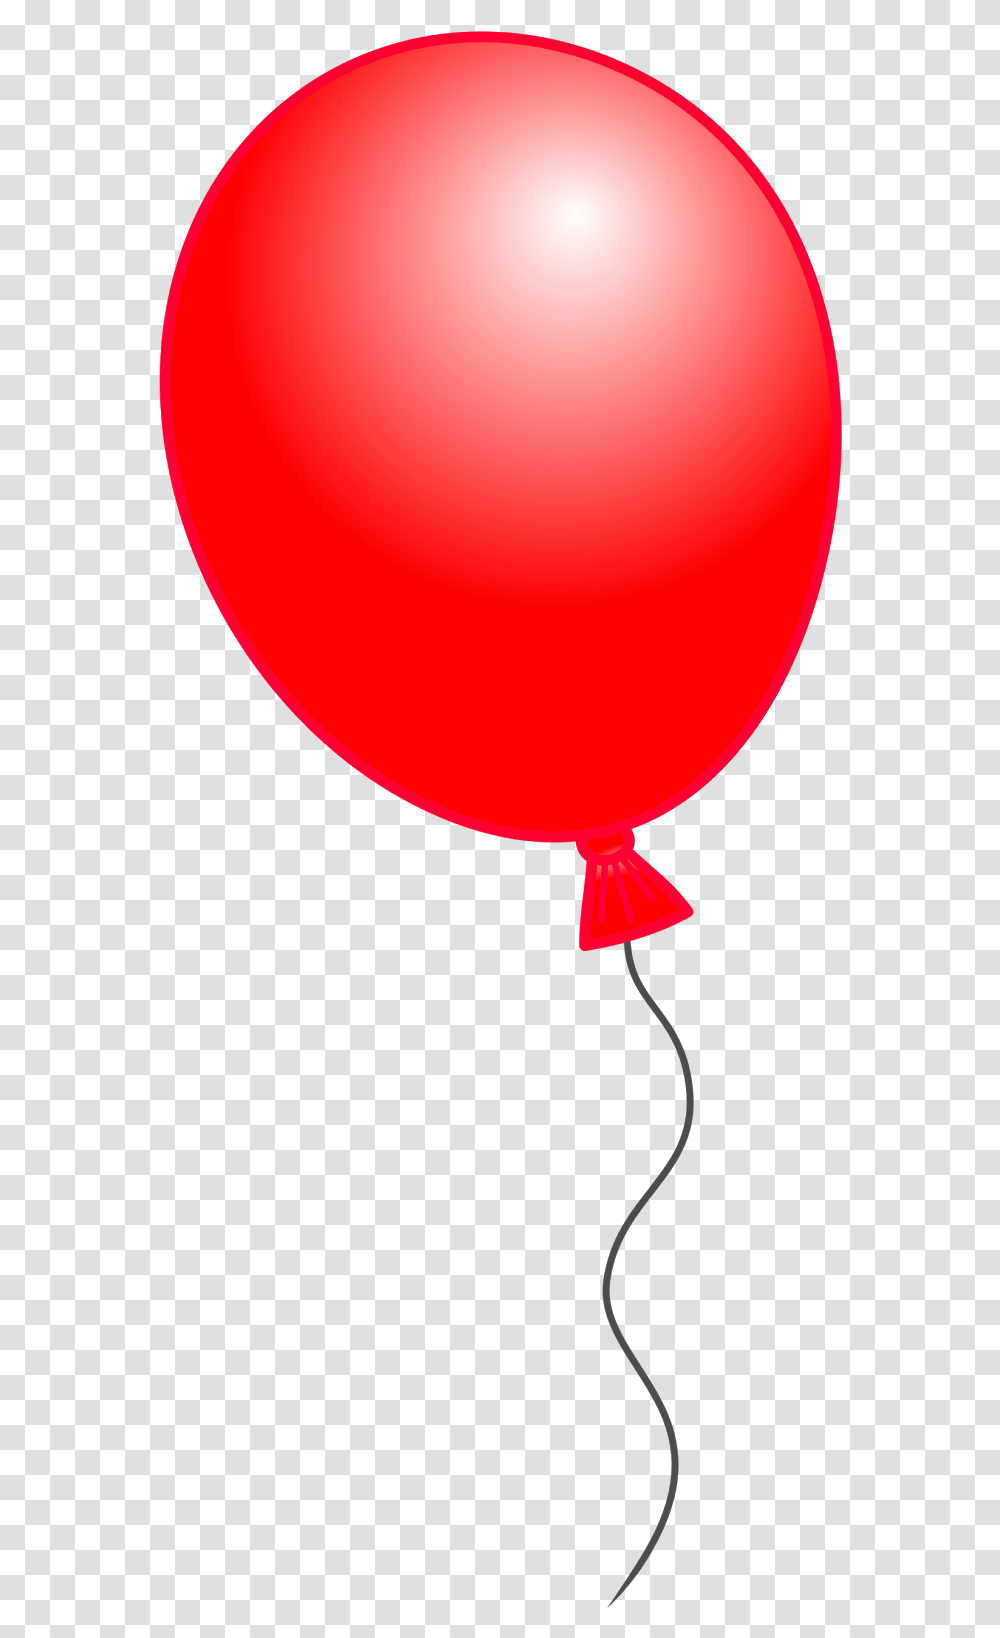 Classroom Treasures Birthday Balloons And That's Who Clipart Of Balloon, Lamp Transparent Png